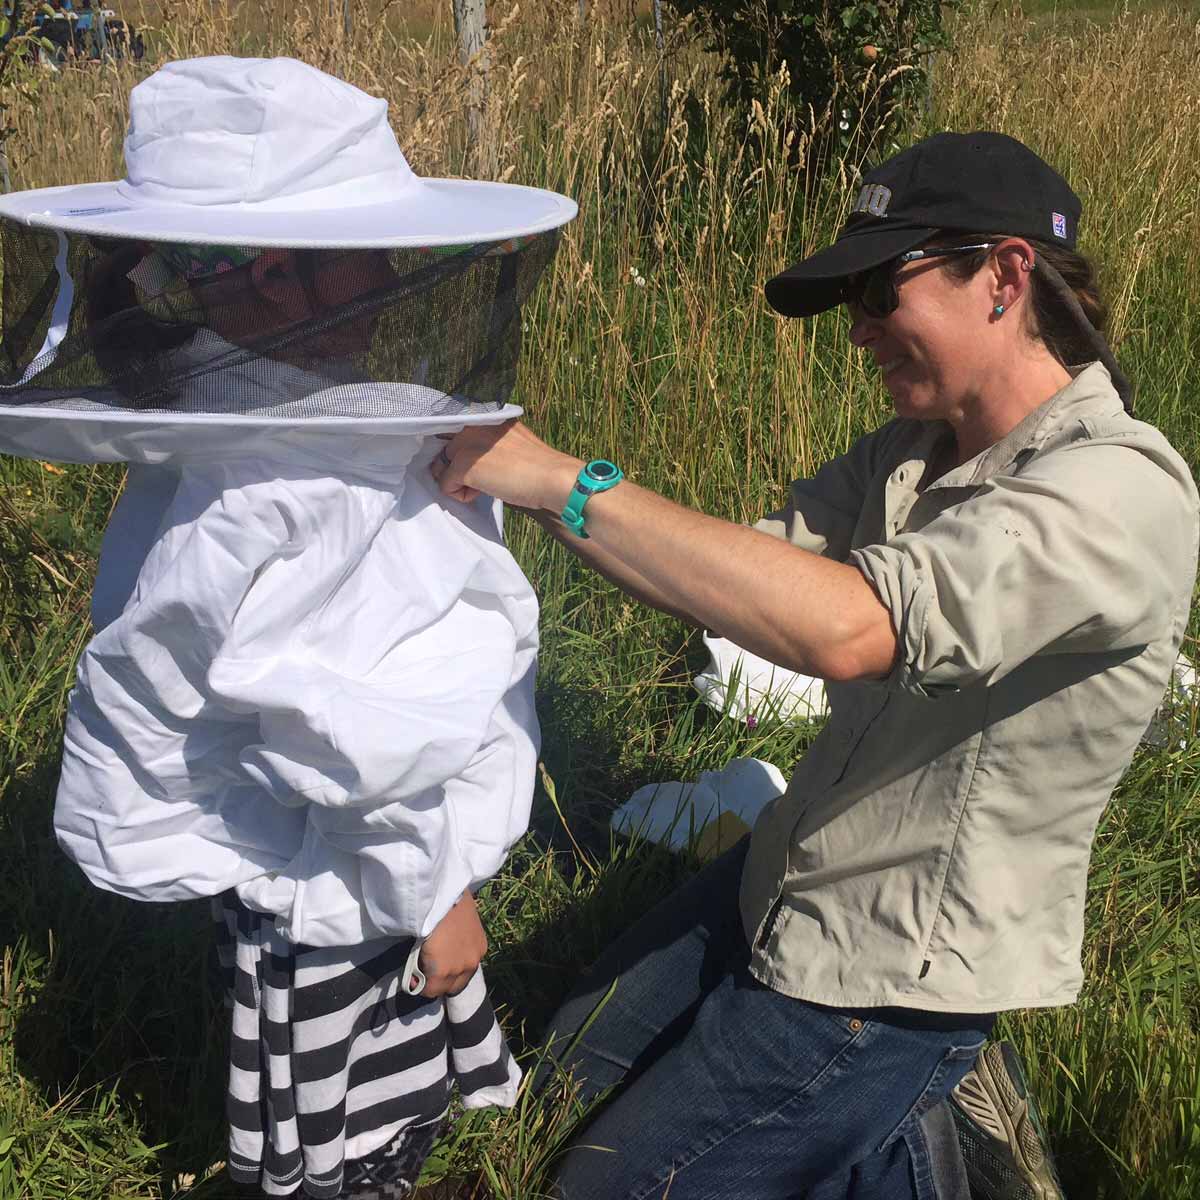 UI Extension educator helping child with beekeeping hood and jacket.